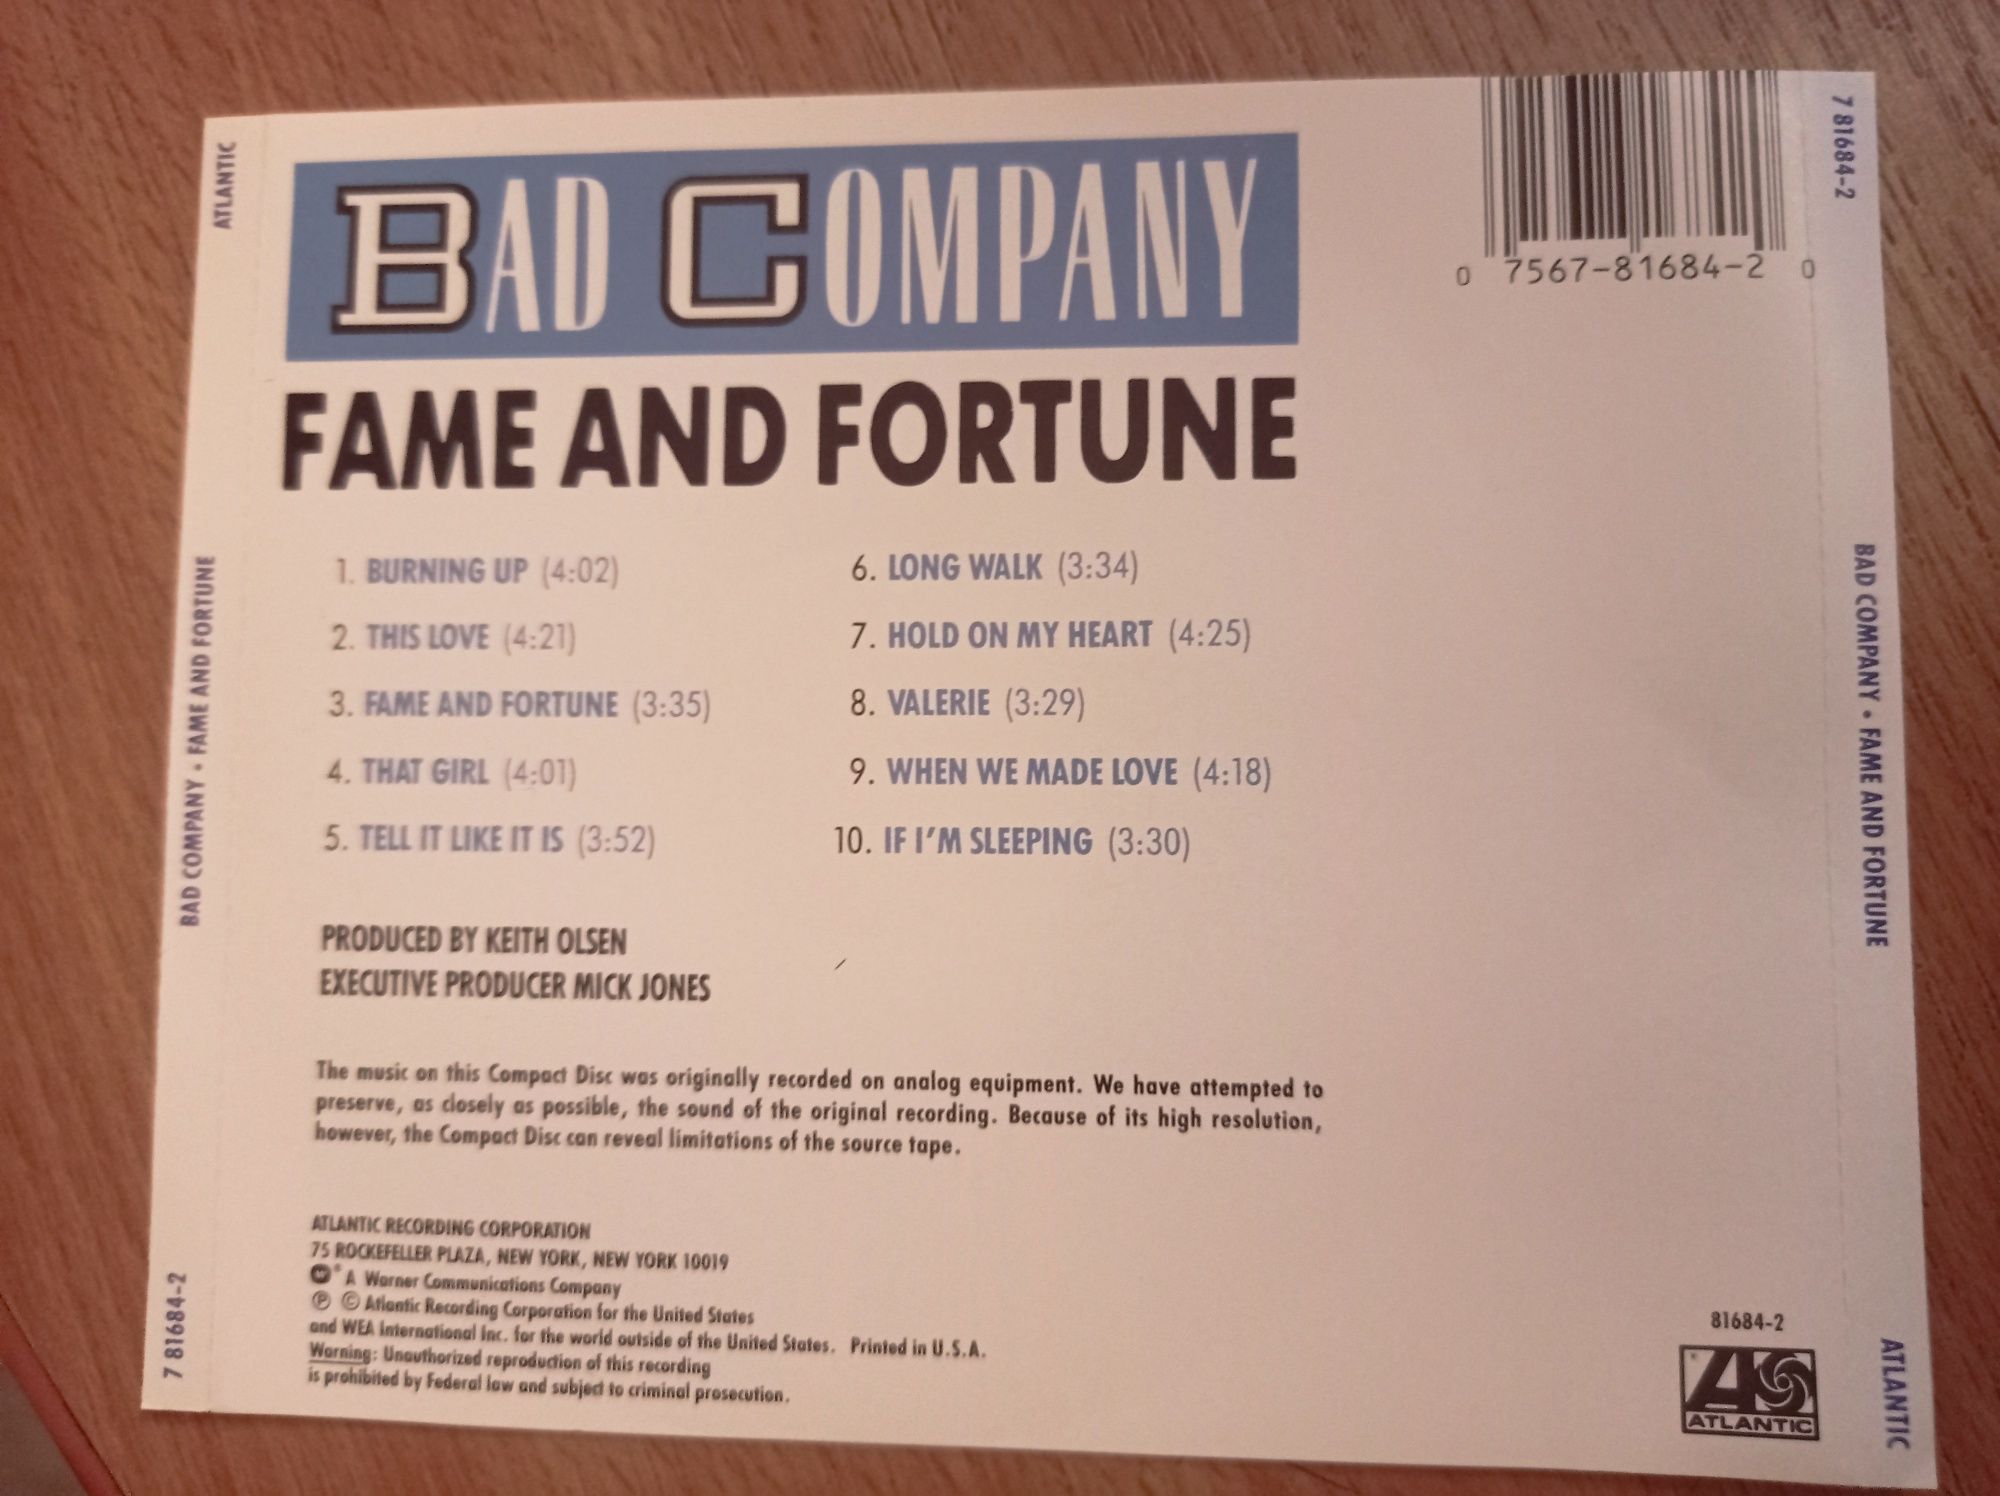 Bad Company - Fame and fortune